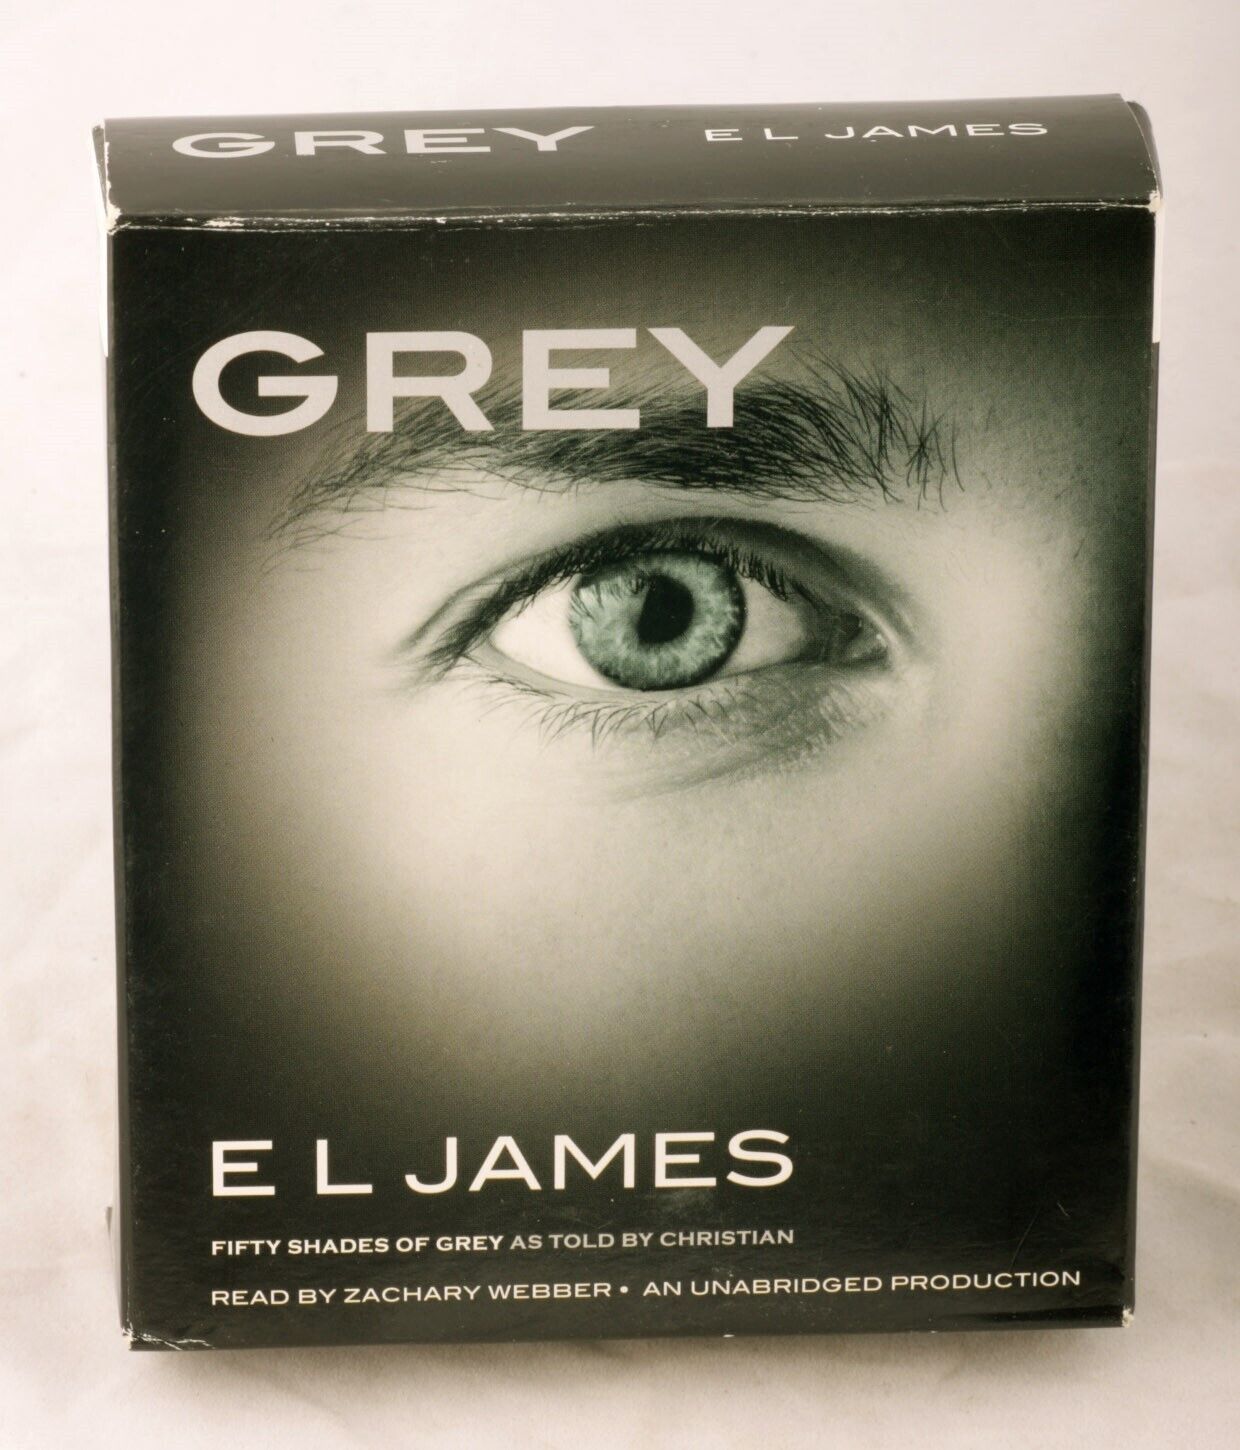 Primary image for Grey: Fifty Shades of Grey As Told by Christian by EL James audio CD UNABRIDGED